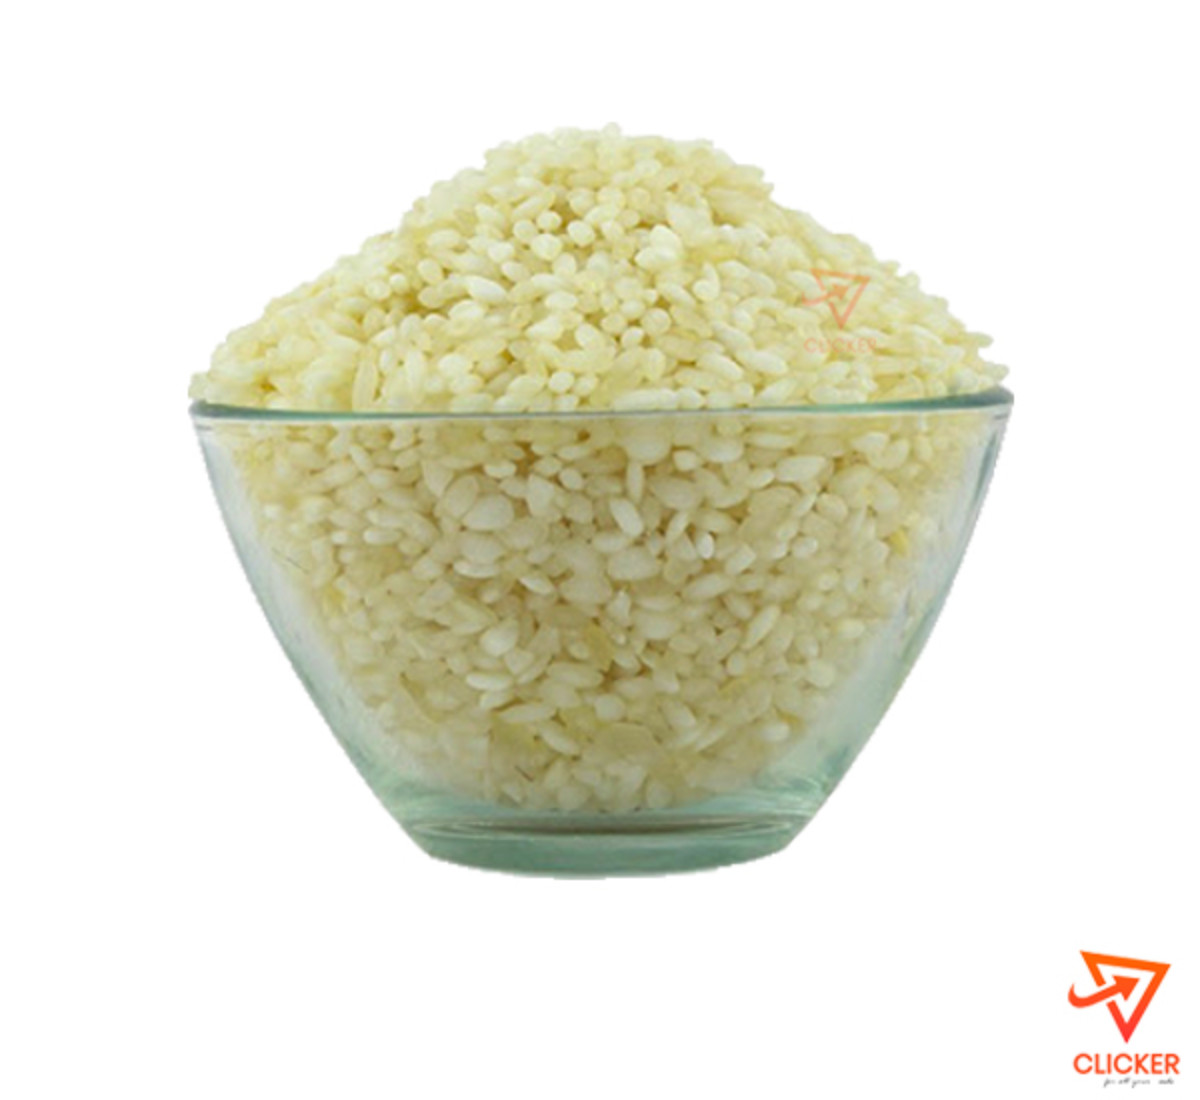 Clicker product 1Kg Idly Rice 859